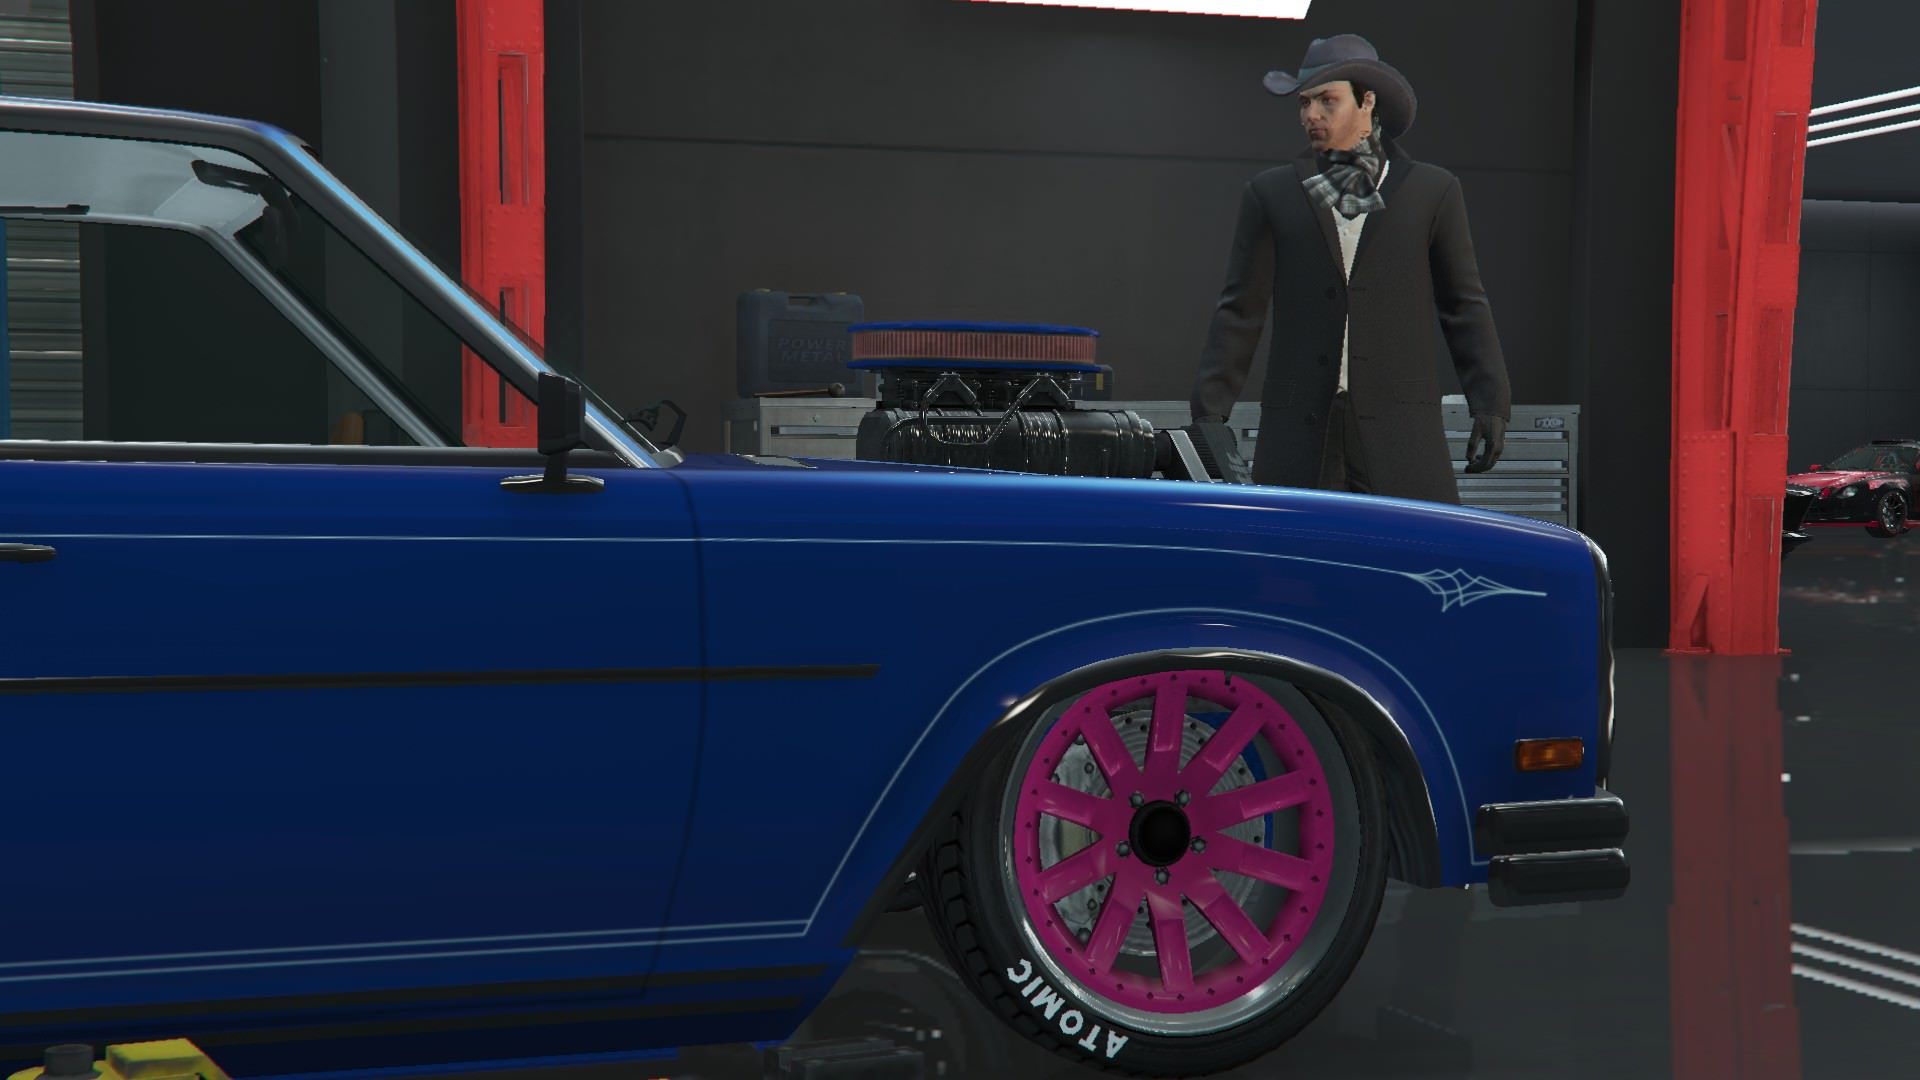 Owning an Auto Shop has you questioning car taste among the Los Santos citizens 2